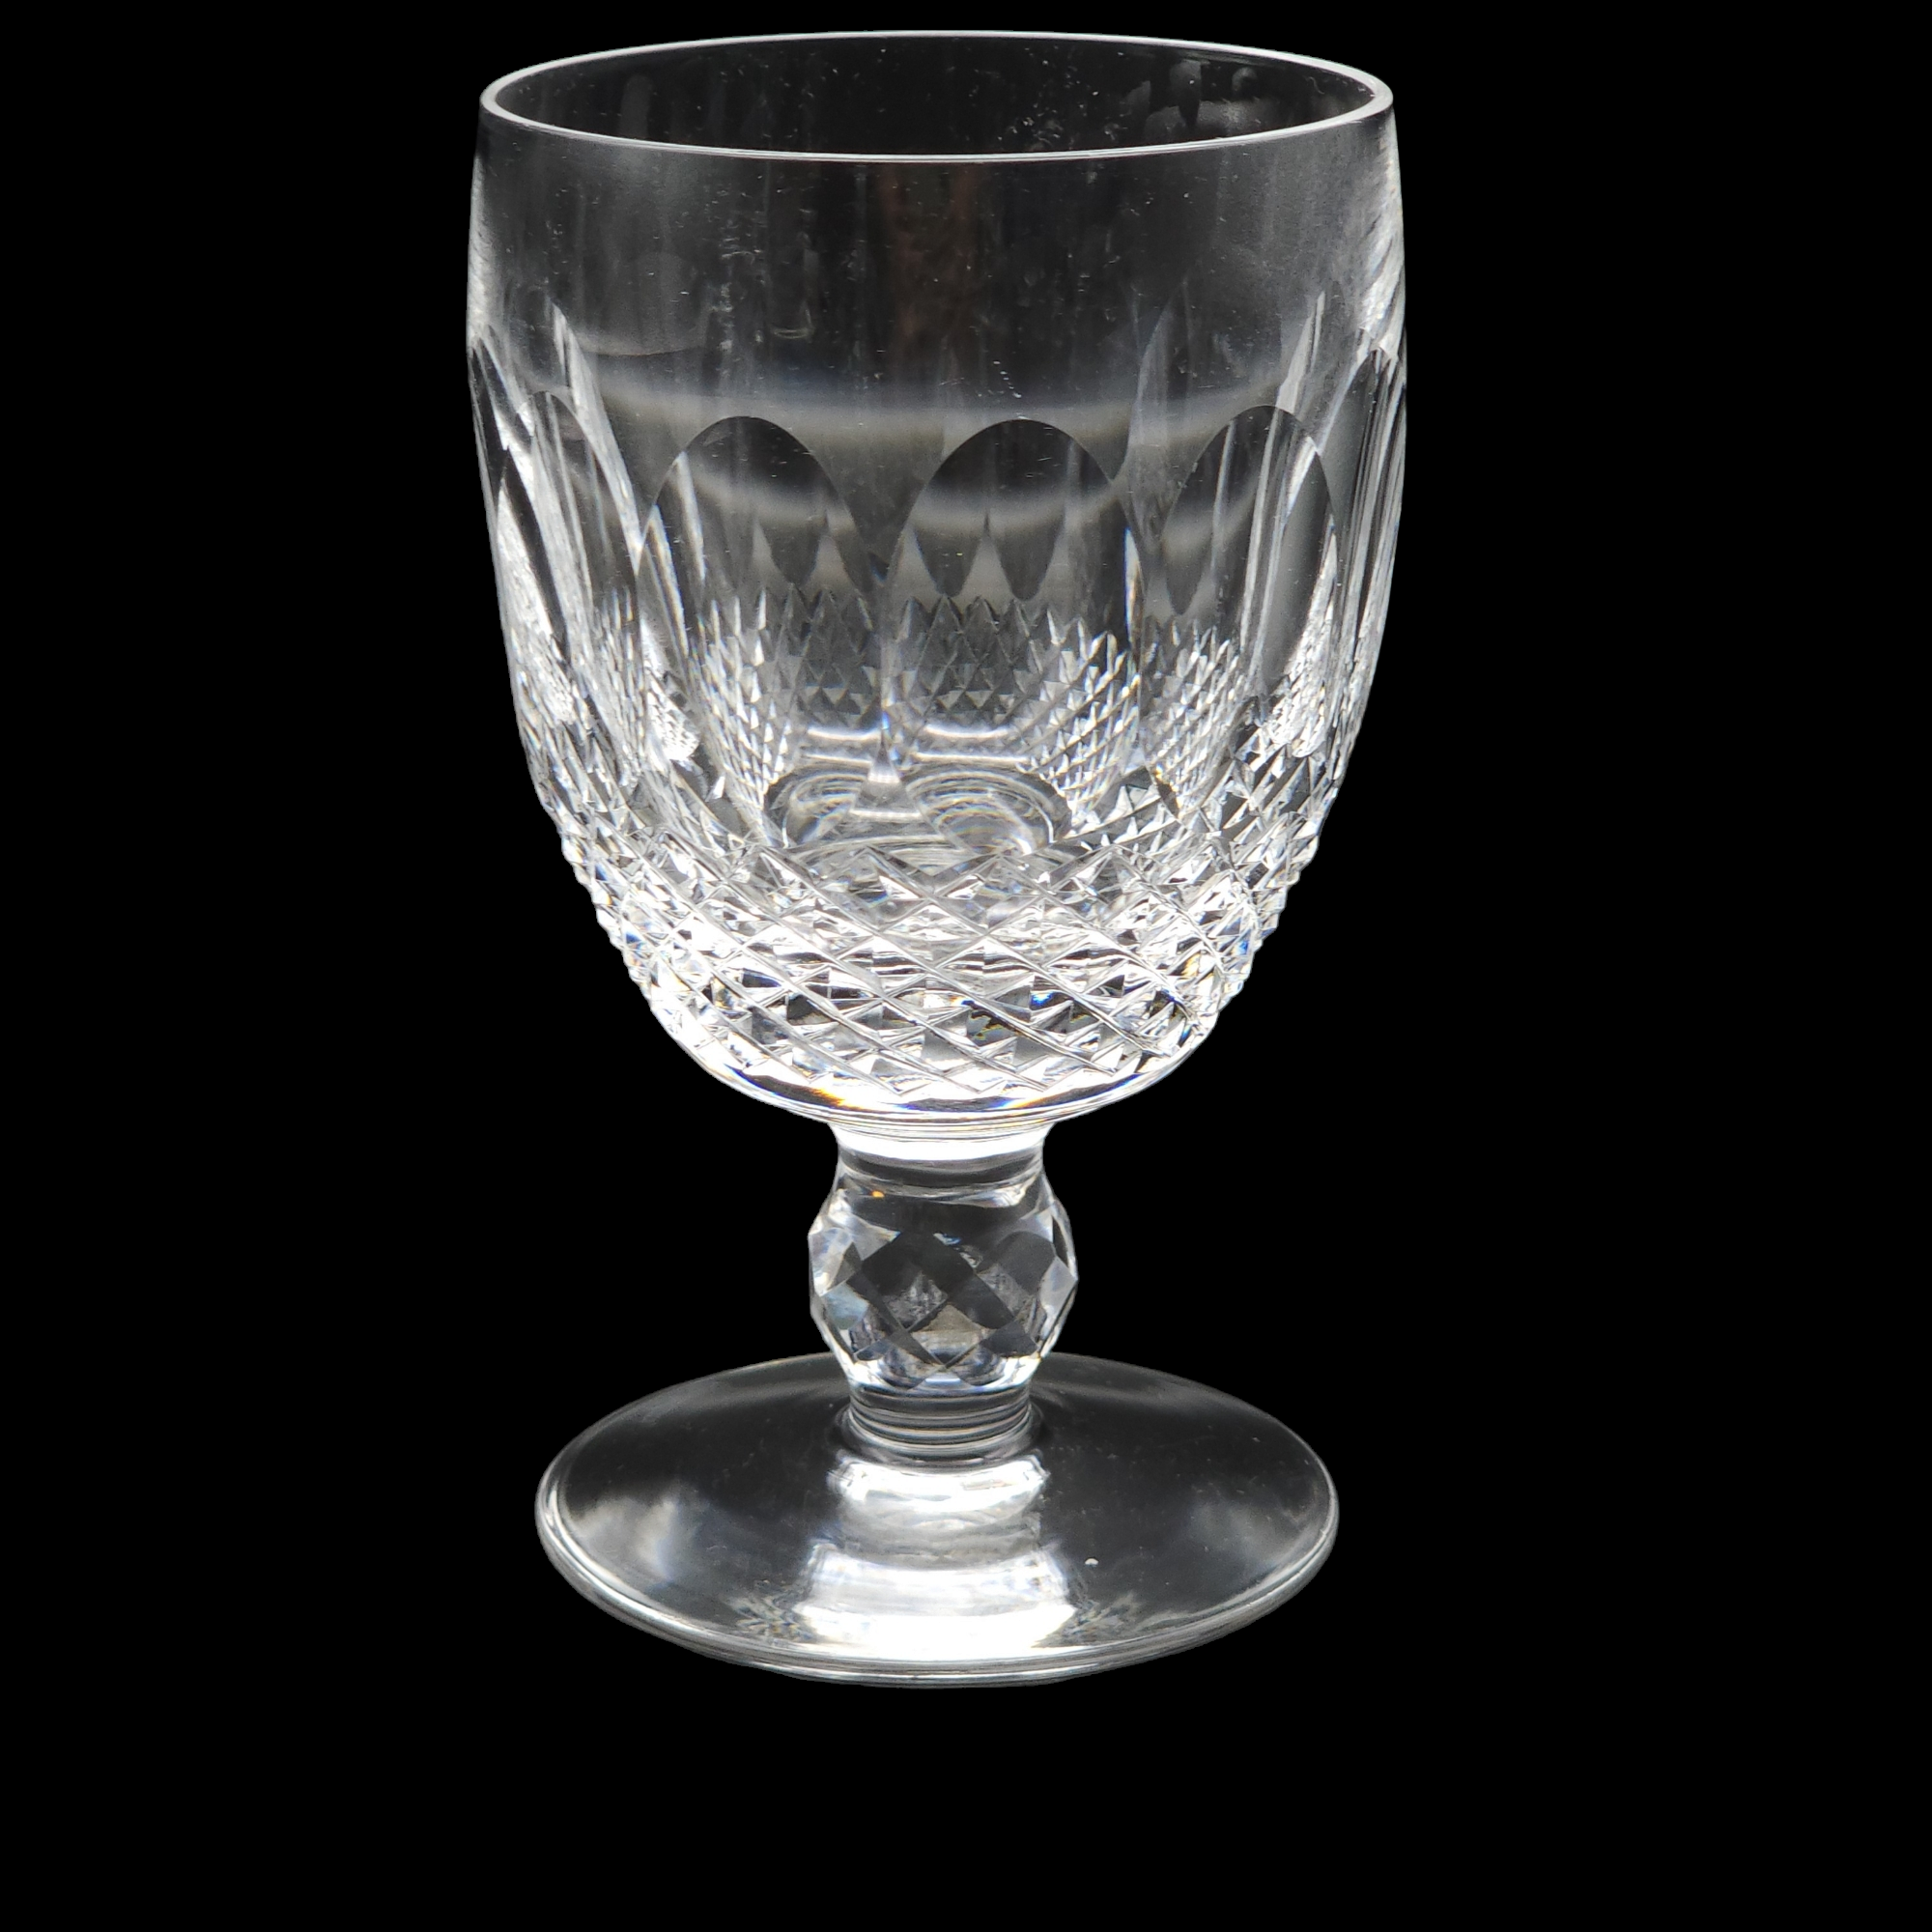 https://cdn11.bigcommerce.com/s-2hcjsv8mjq/images/stencil/original/products/1341/9414/Waterford_Crystal_Colleen_Short_Stem_Water_Goblet2__99768.1696280029.png